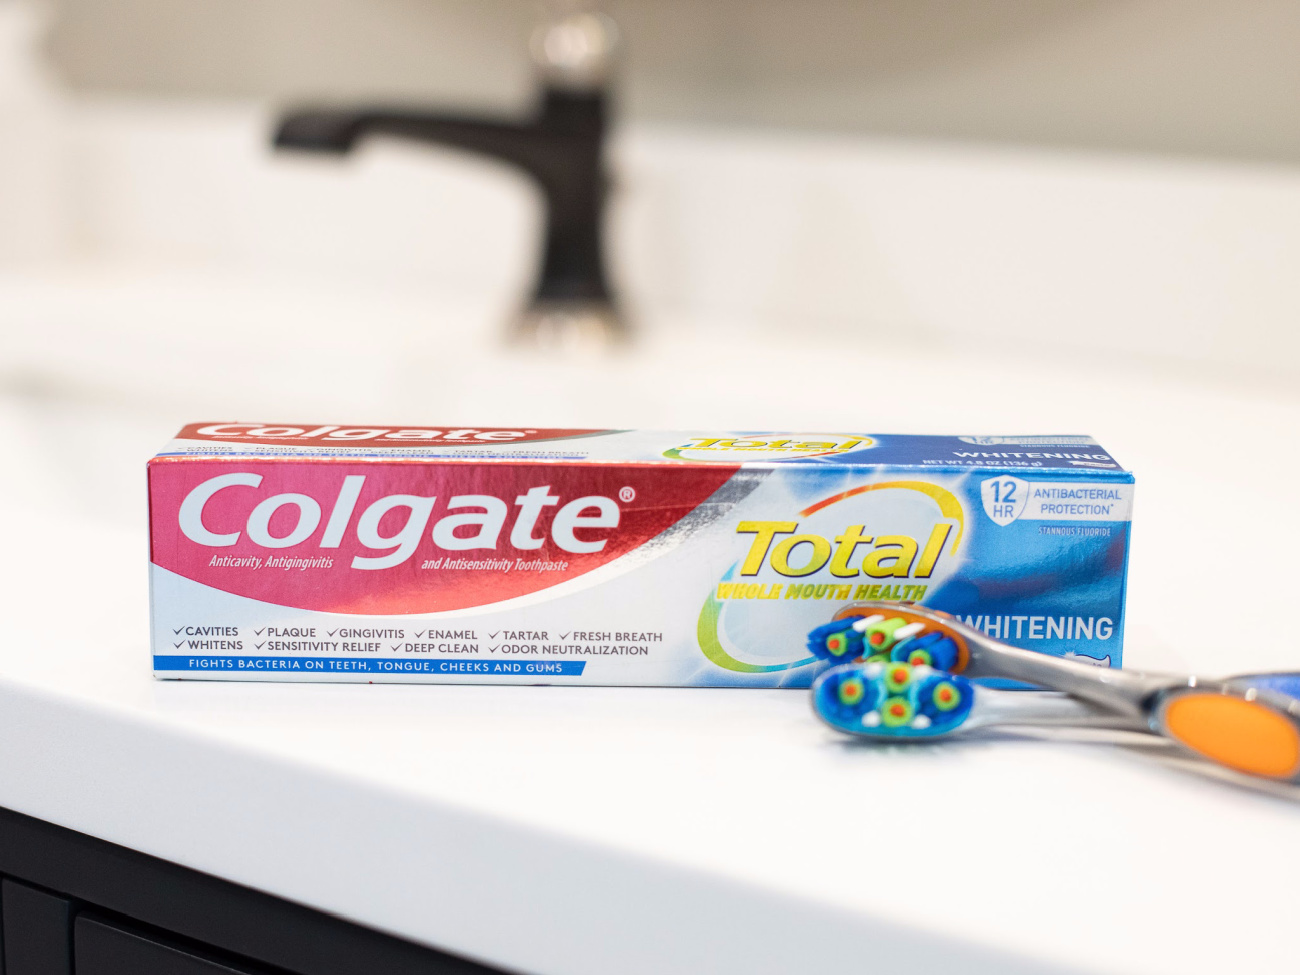 Colgate Total Toothpaste As Low As FREE At Kroger – Ends Today!